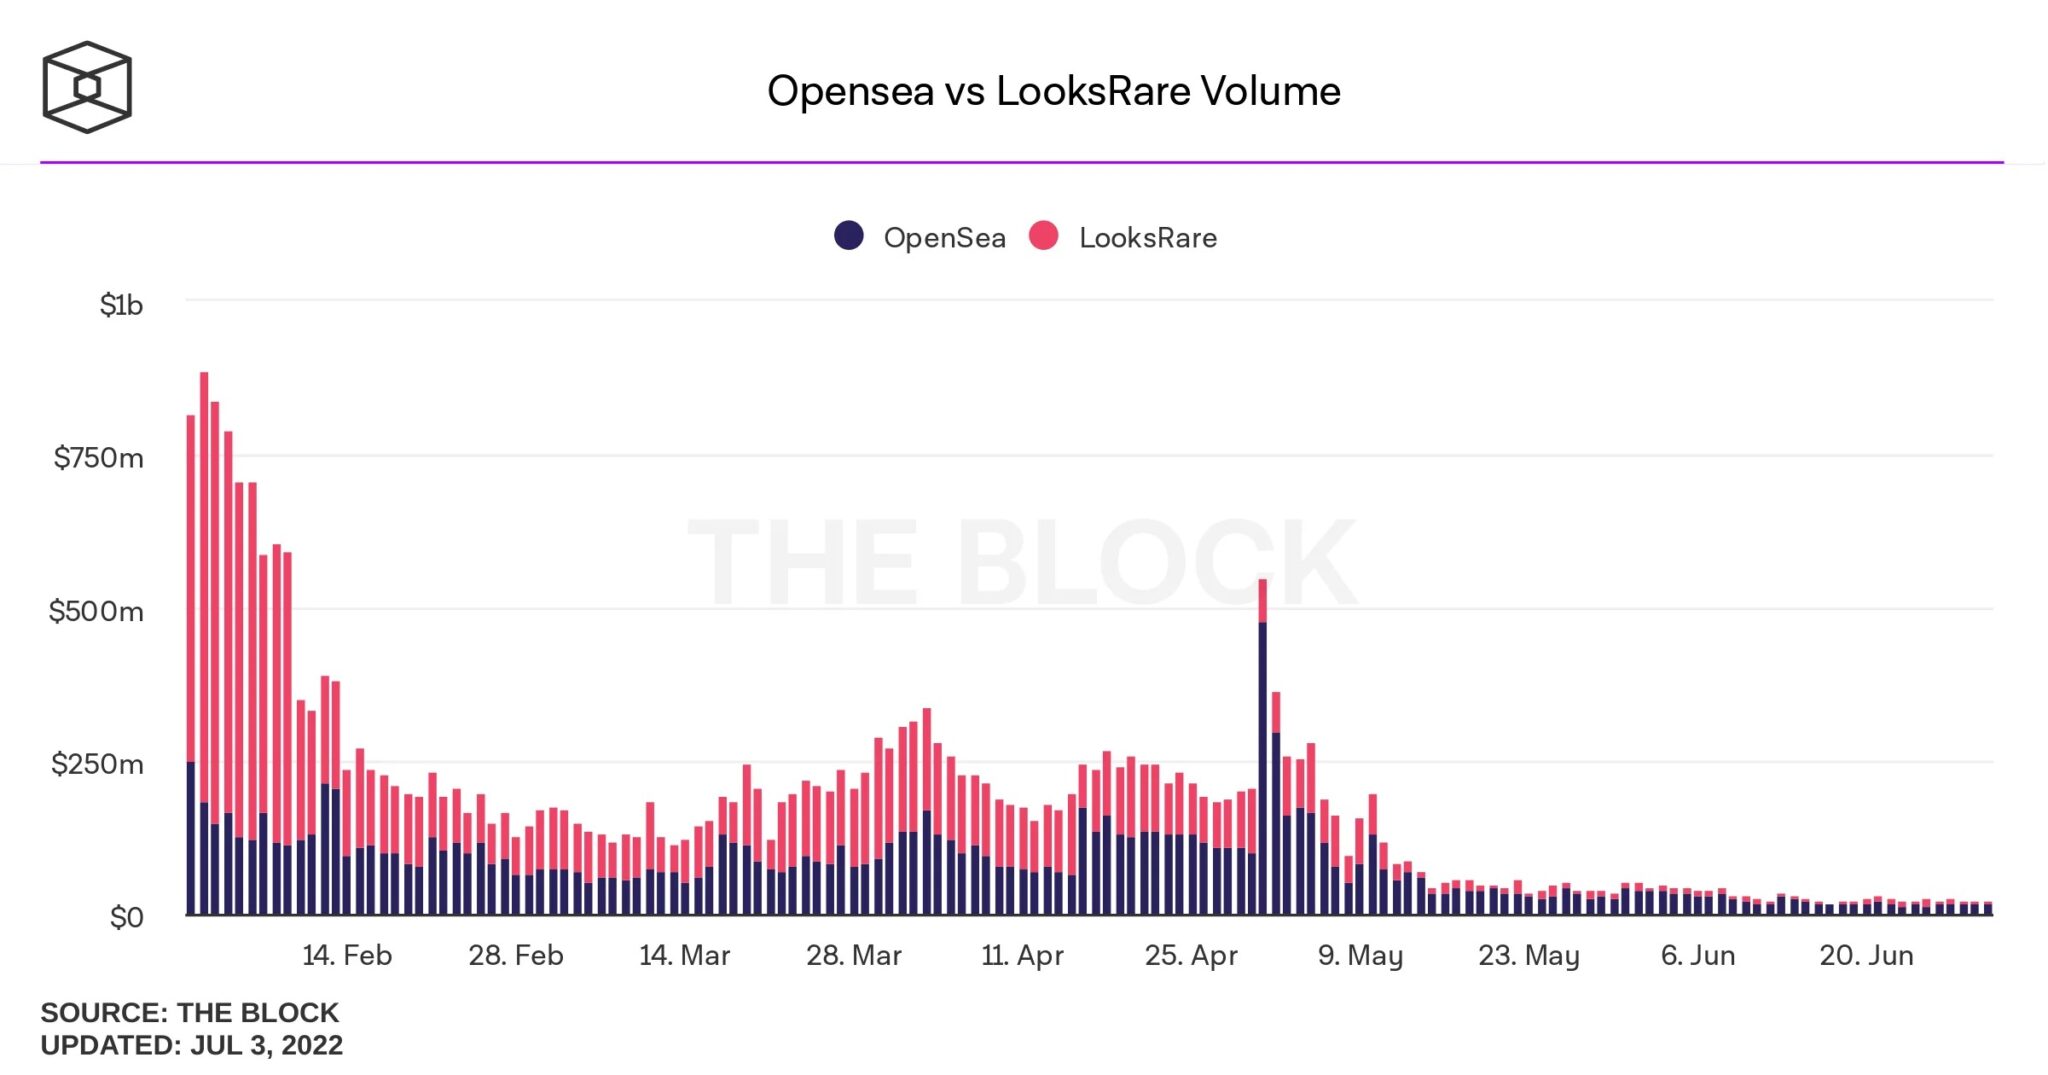 Figure 2: Comparison of volumes between OpenSea and LooksRare